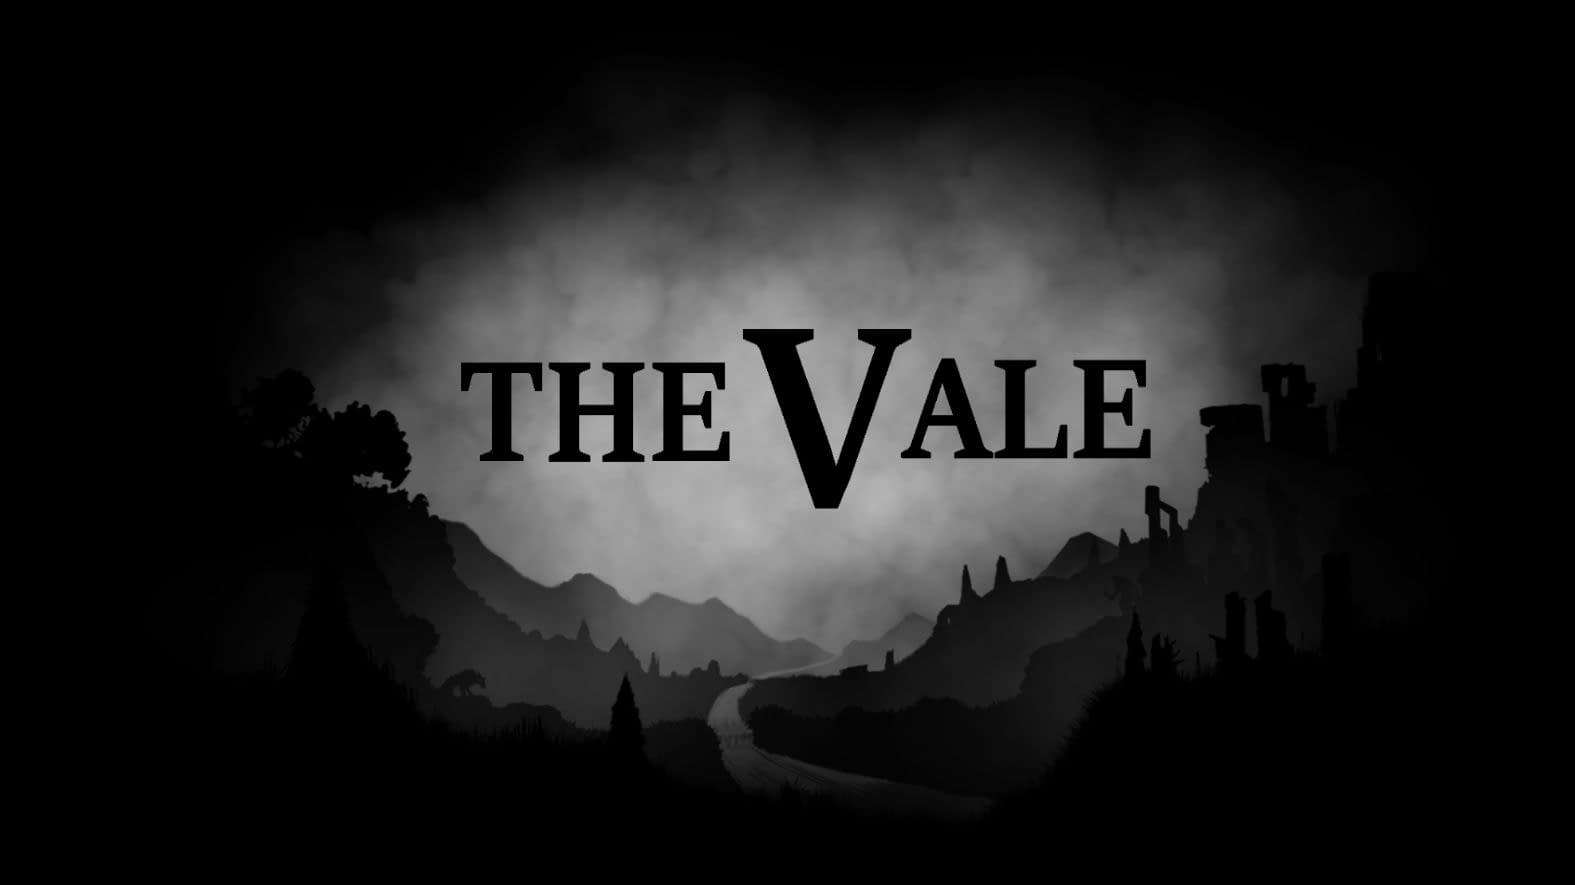 Discover the Xbox Game that Shows the Medieval Age - The Vale